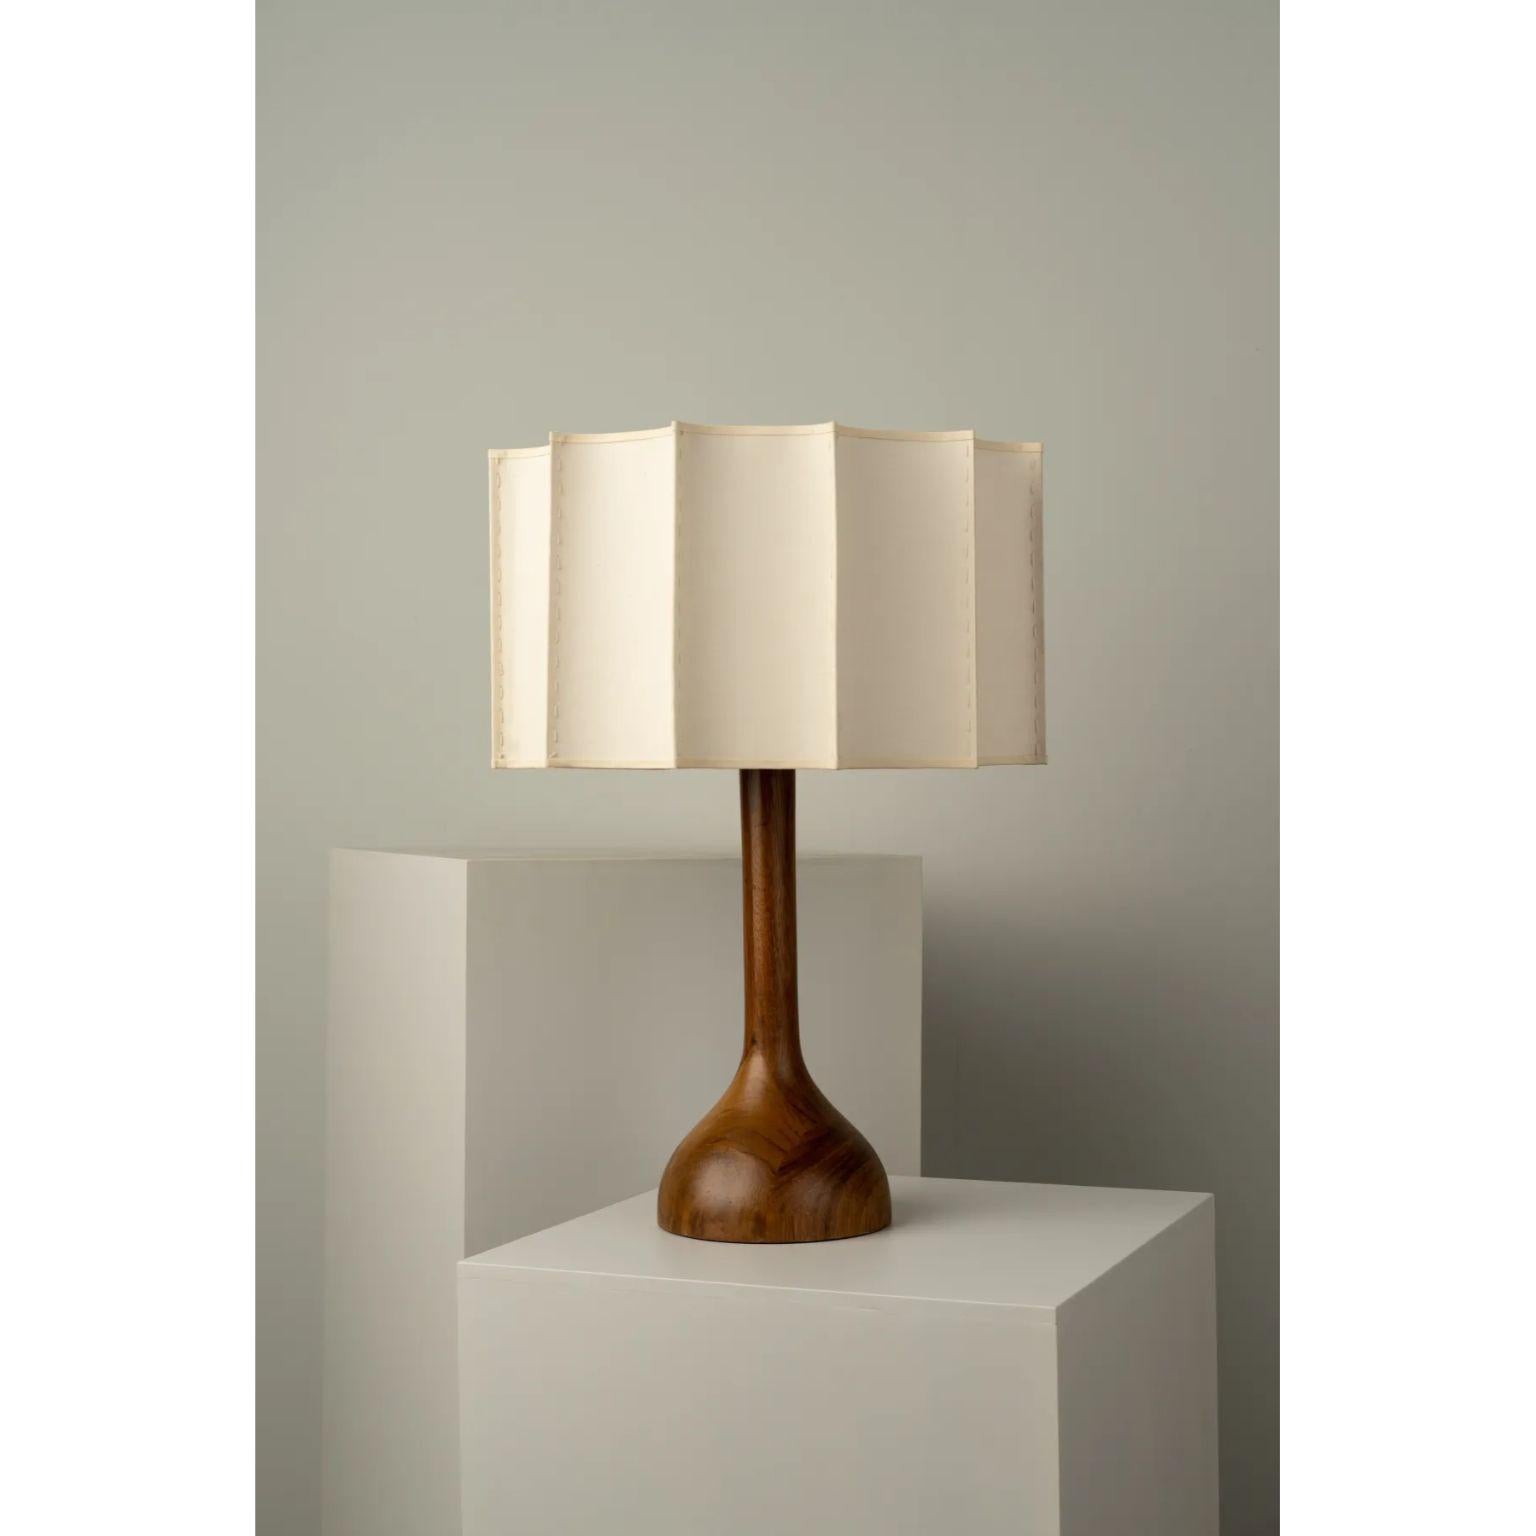 Pata De Elefante Small Table Lamp by Isabel Moncada
Dimensions: Ø 48.5 x H 74 cm.
Materials: Turned parota wood base and fabric-lined lampshade with fiberglass and polystyrene.

Named Pata de Elefante –Elephant‘s Foot– for the prominent shape at its